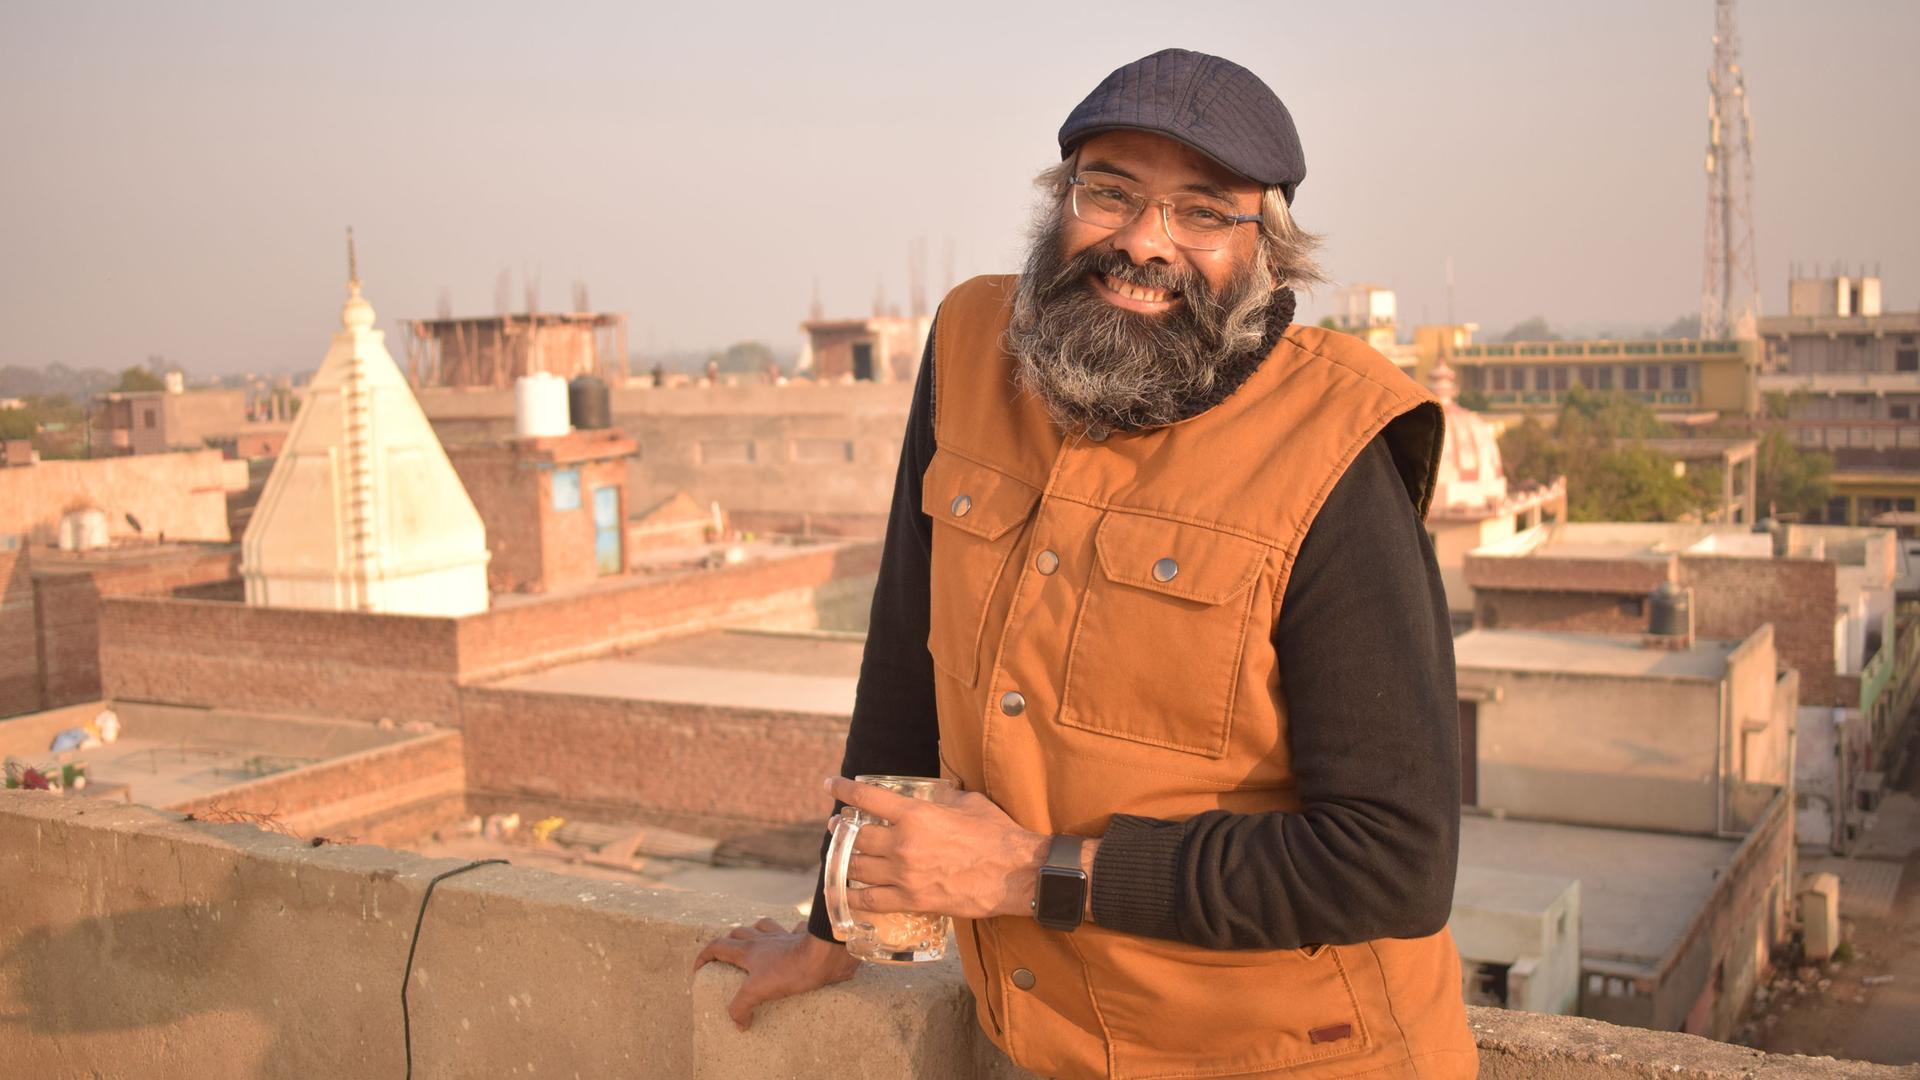 Humanist Purnendu Goswami, 49, at his ashram in the pilgrimage town of Vrindavan, India. Goswami runs a school for underprivileged children on the ashram grounds.